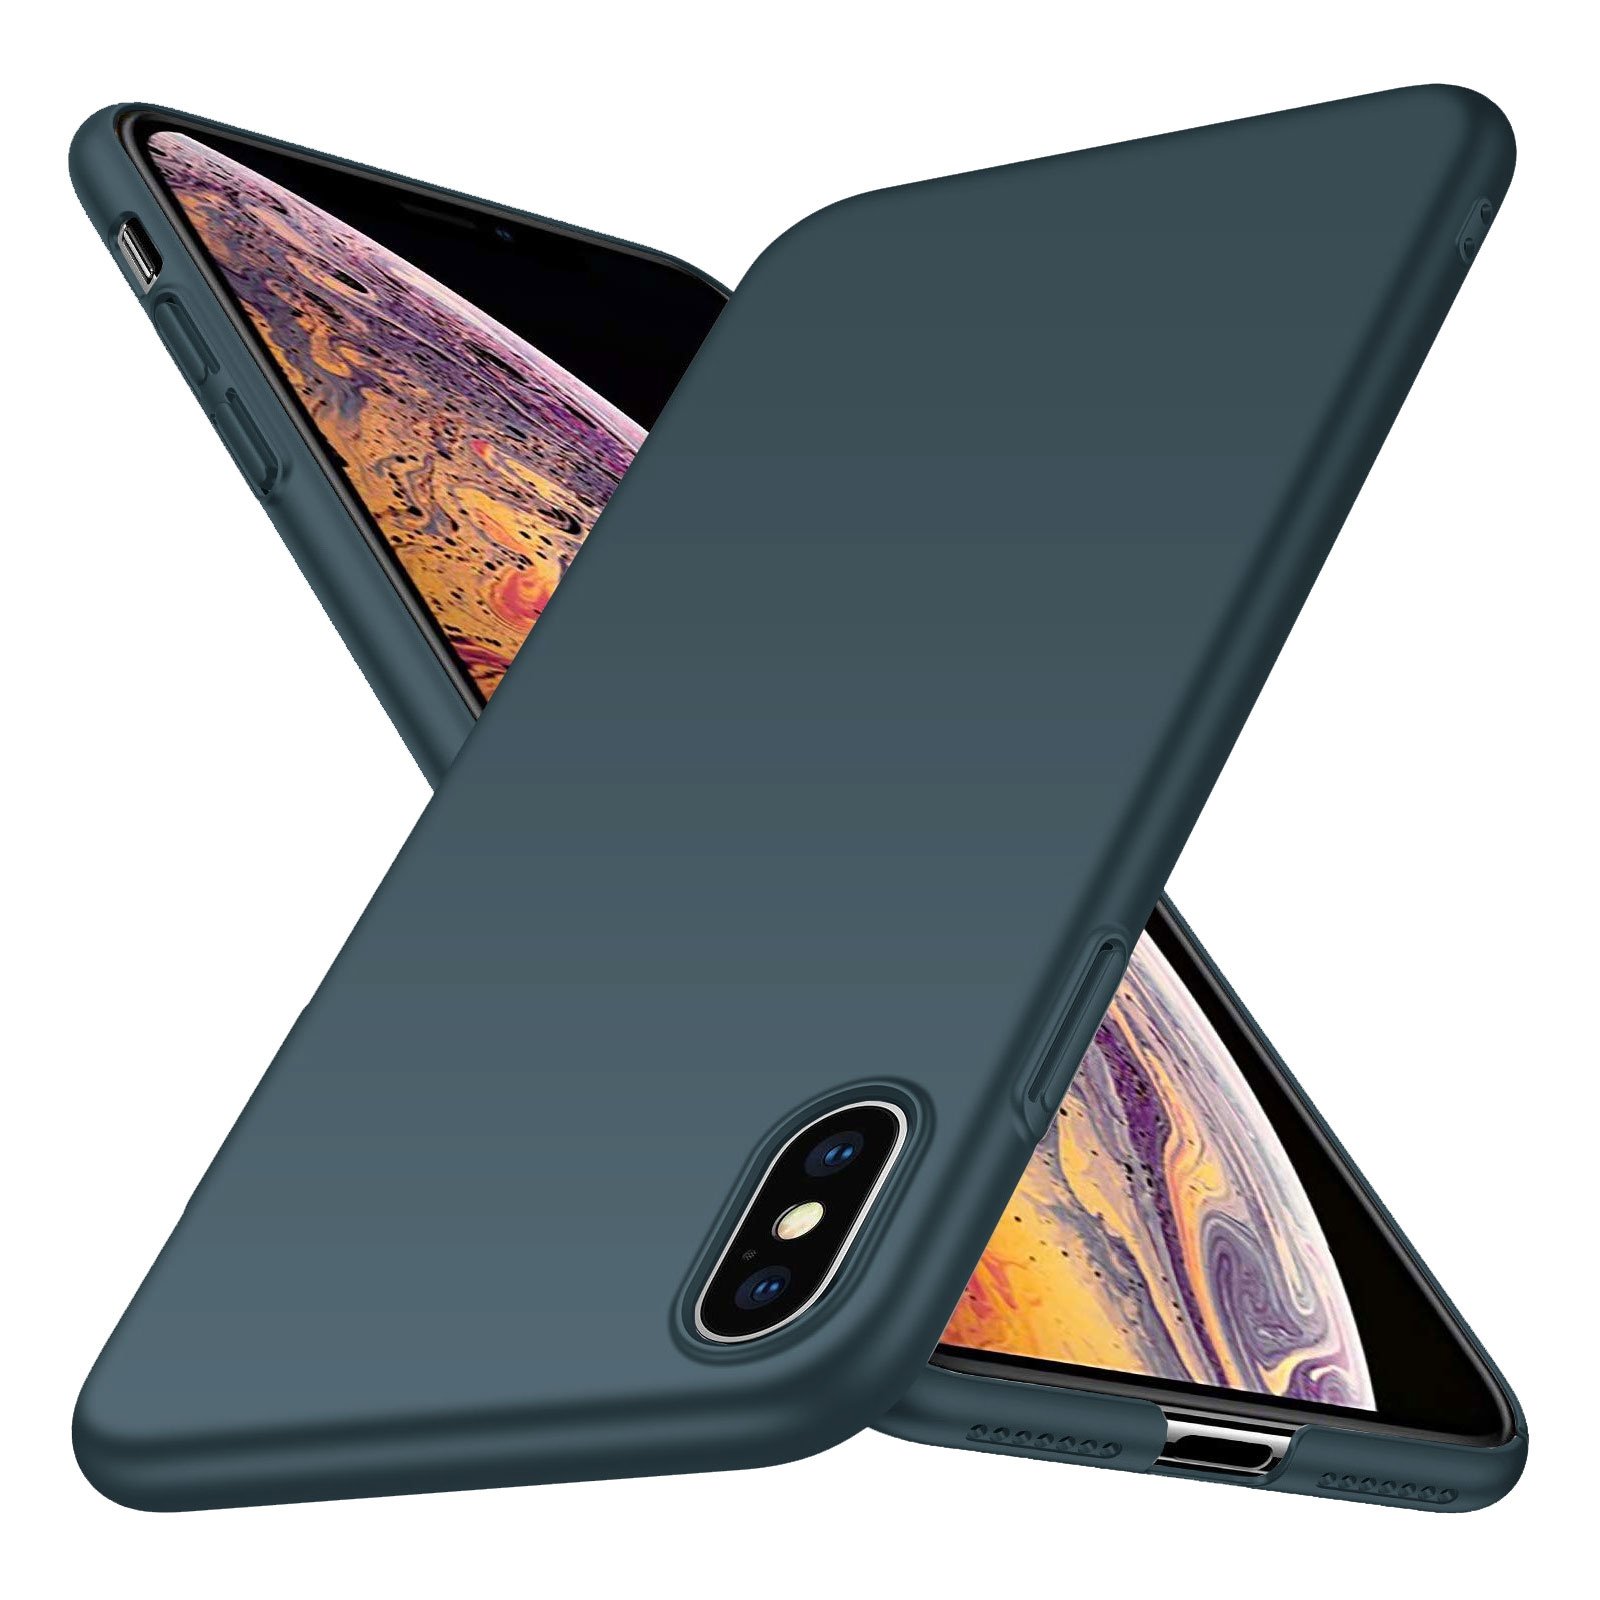 eetpatroon Victor woonadres Back Case Cover iPhone Xs Max Case Green Forest - Geeektech.com